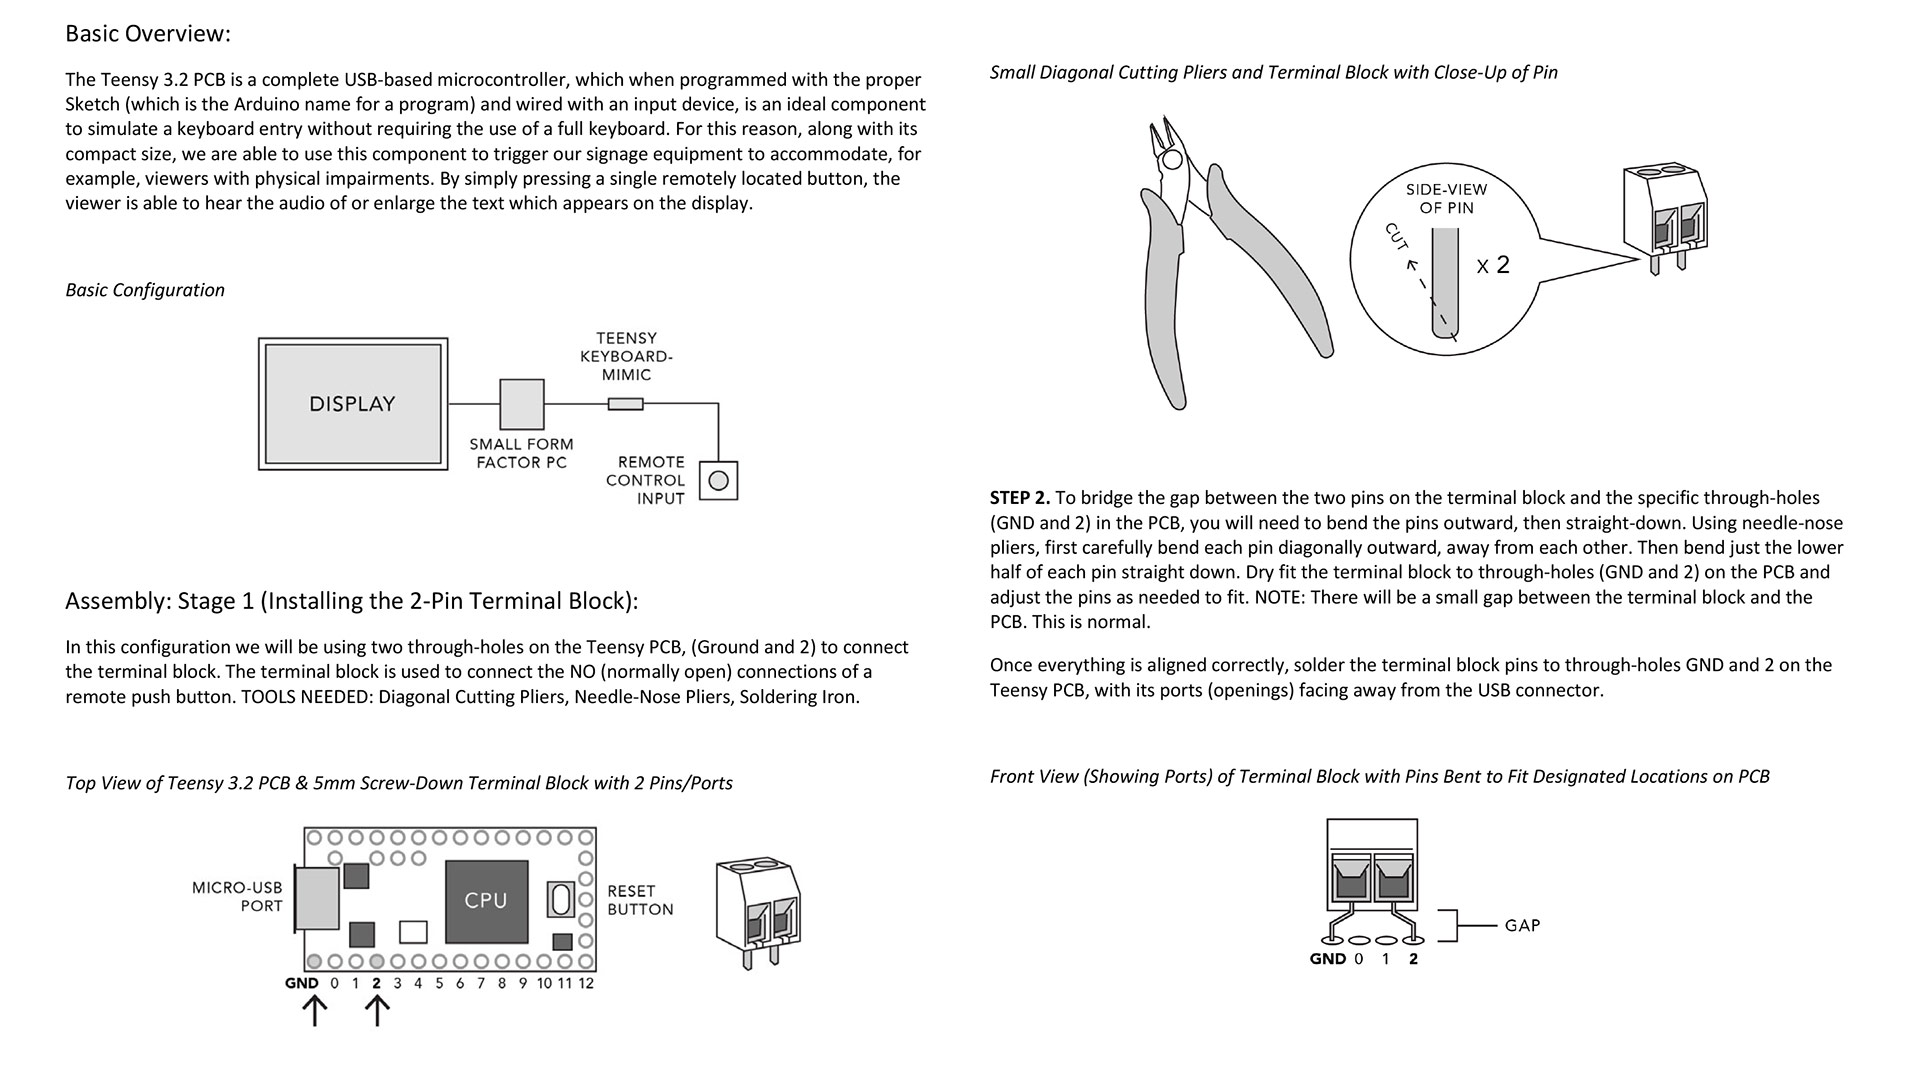 a partial section of instructions with technical illustrations of tools and components